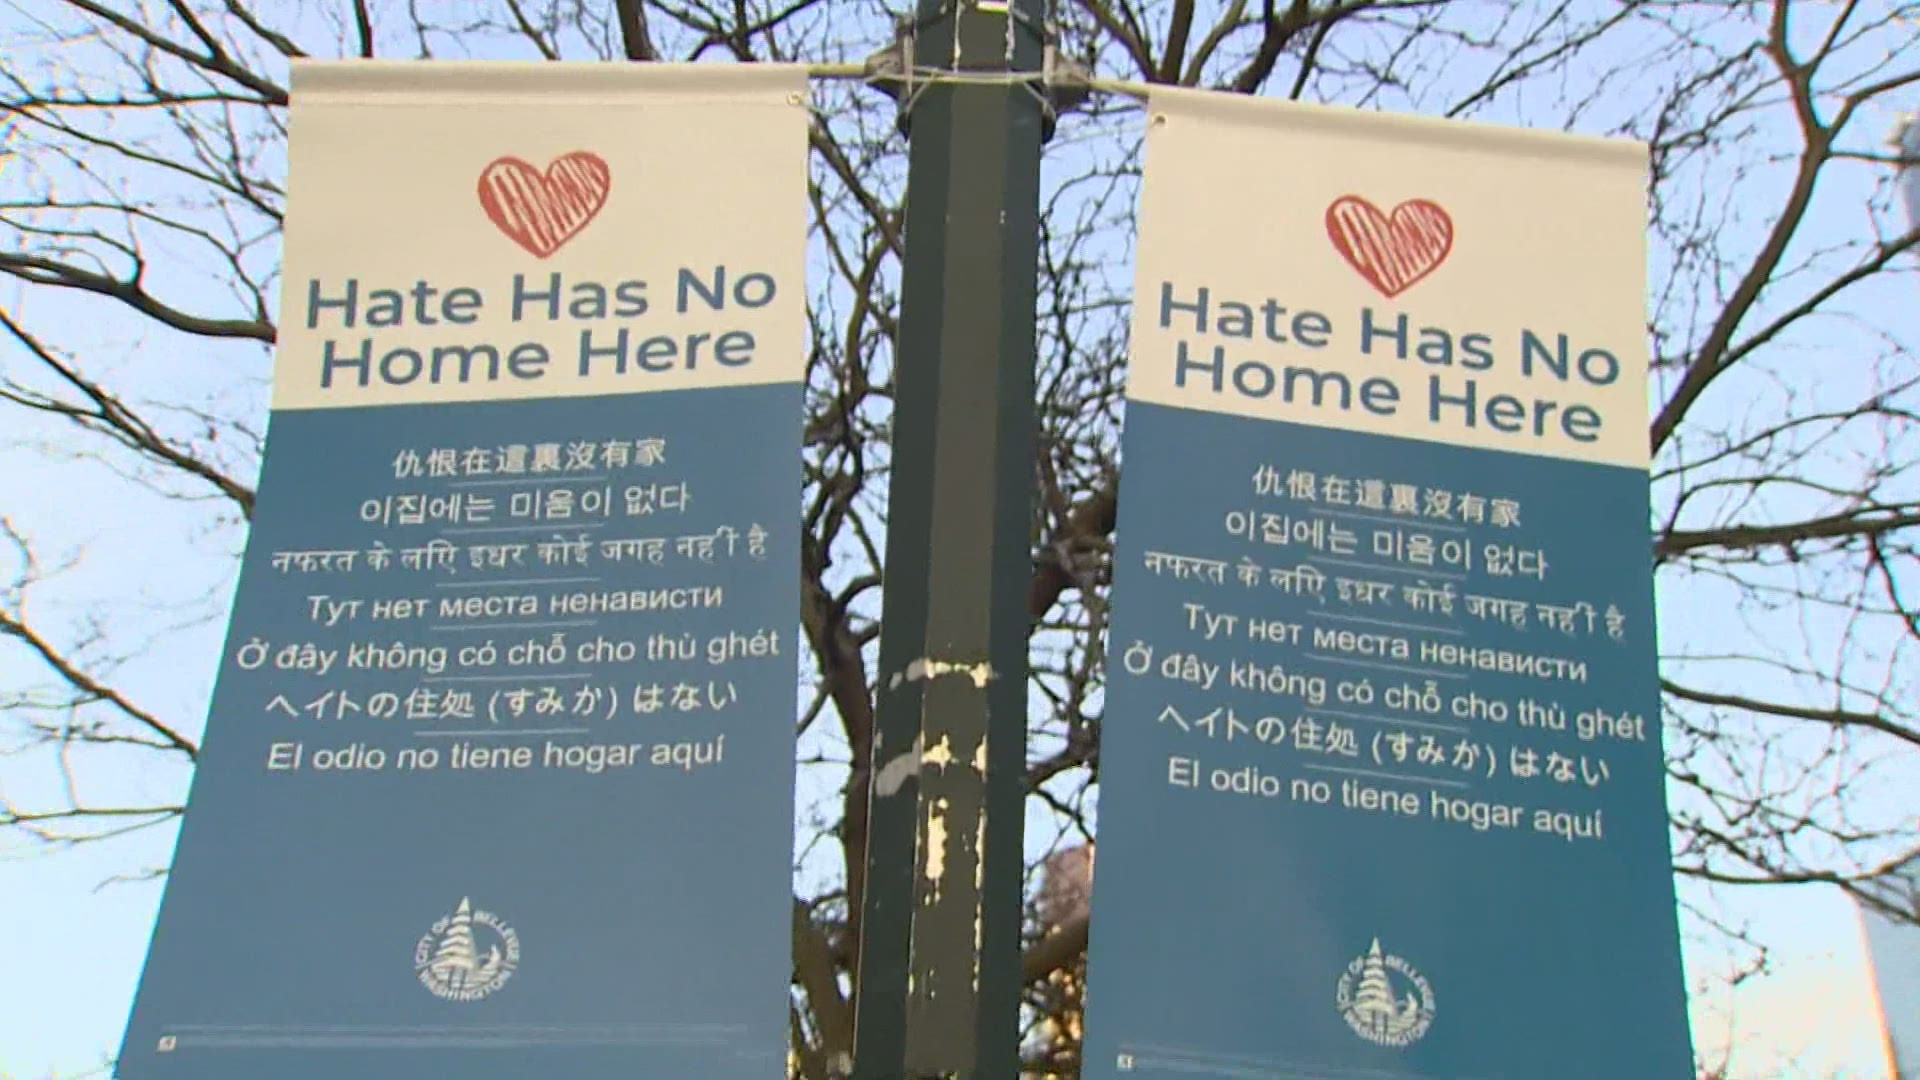 The city is providing free signs for homes and stickers for store windows.